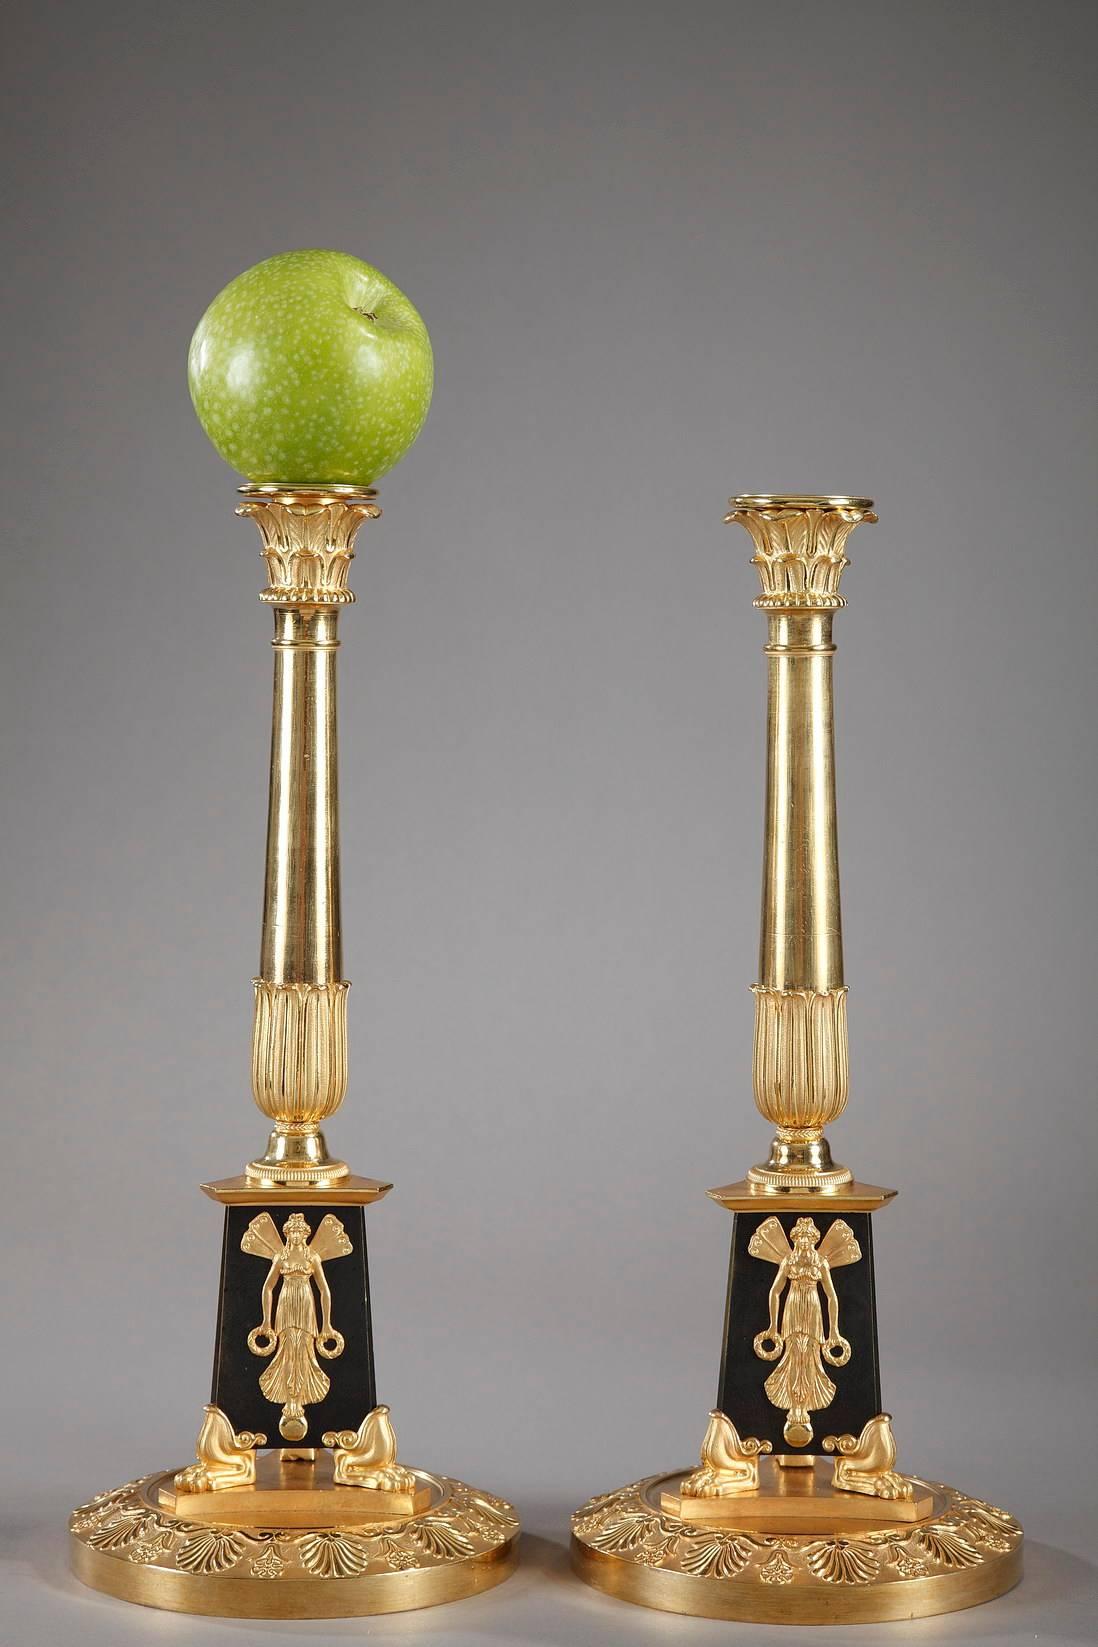 Bronze Pair of Empire Candlesticks with Allegories of Victory